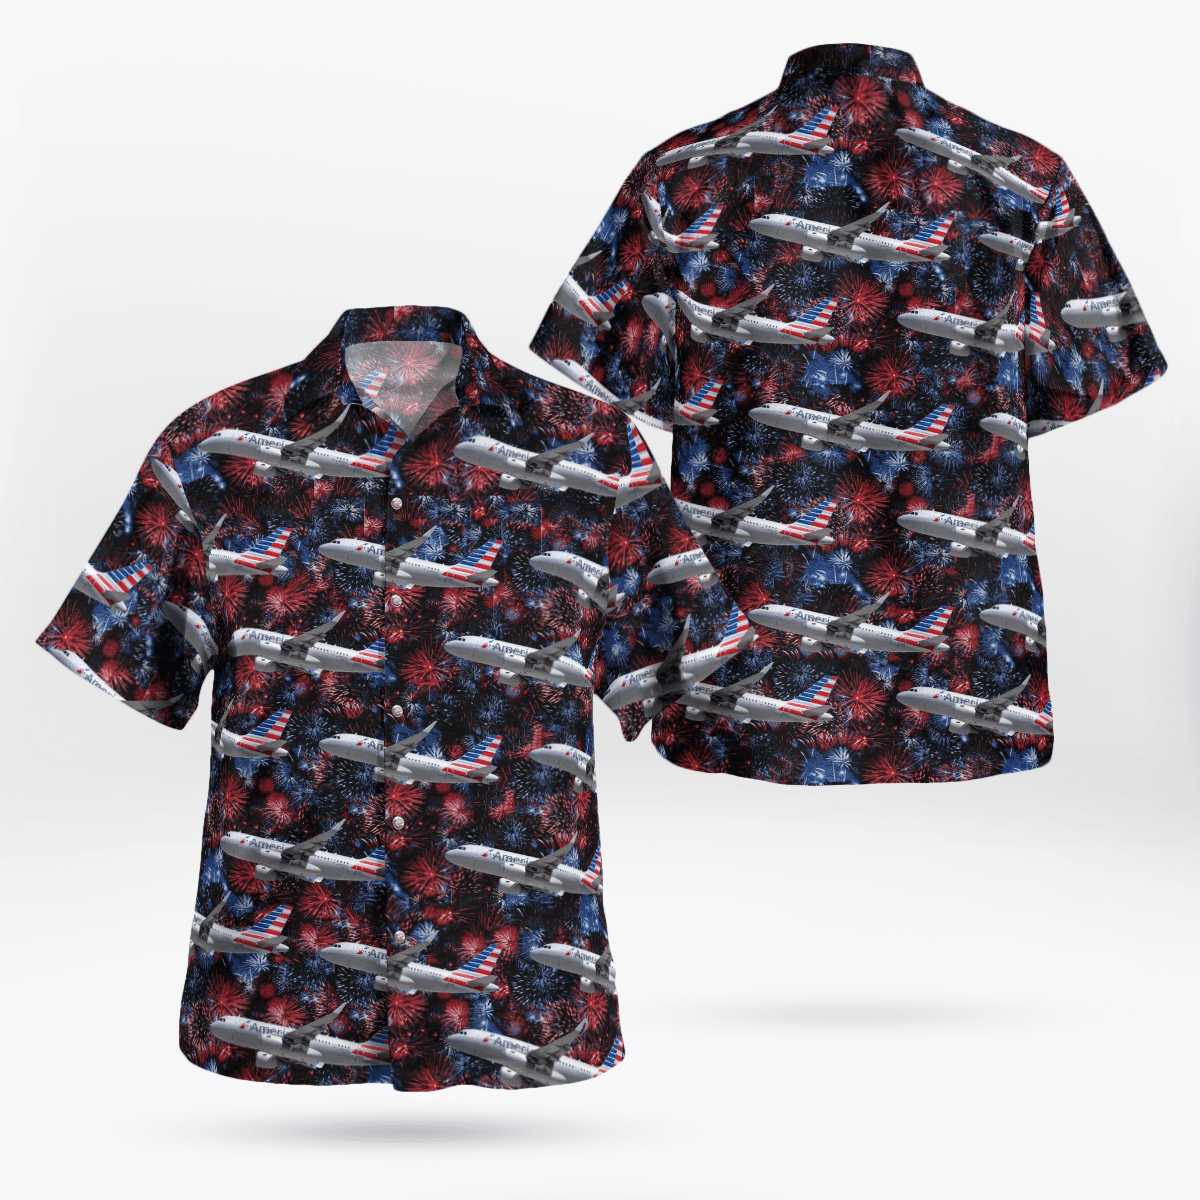 Consider getting these Hawaiian Shirt for your friends 287